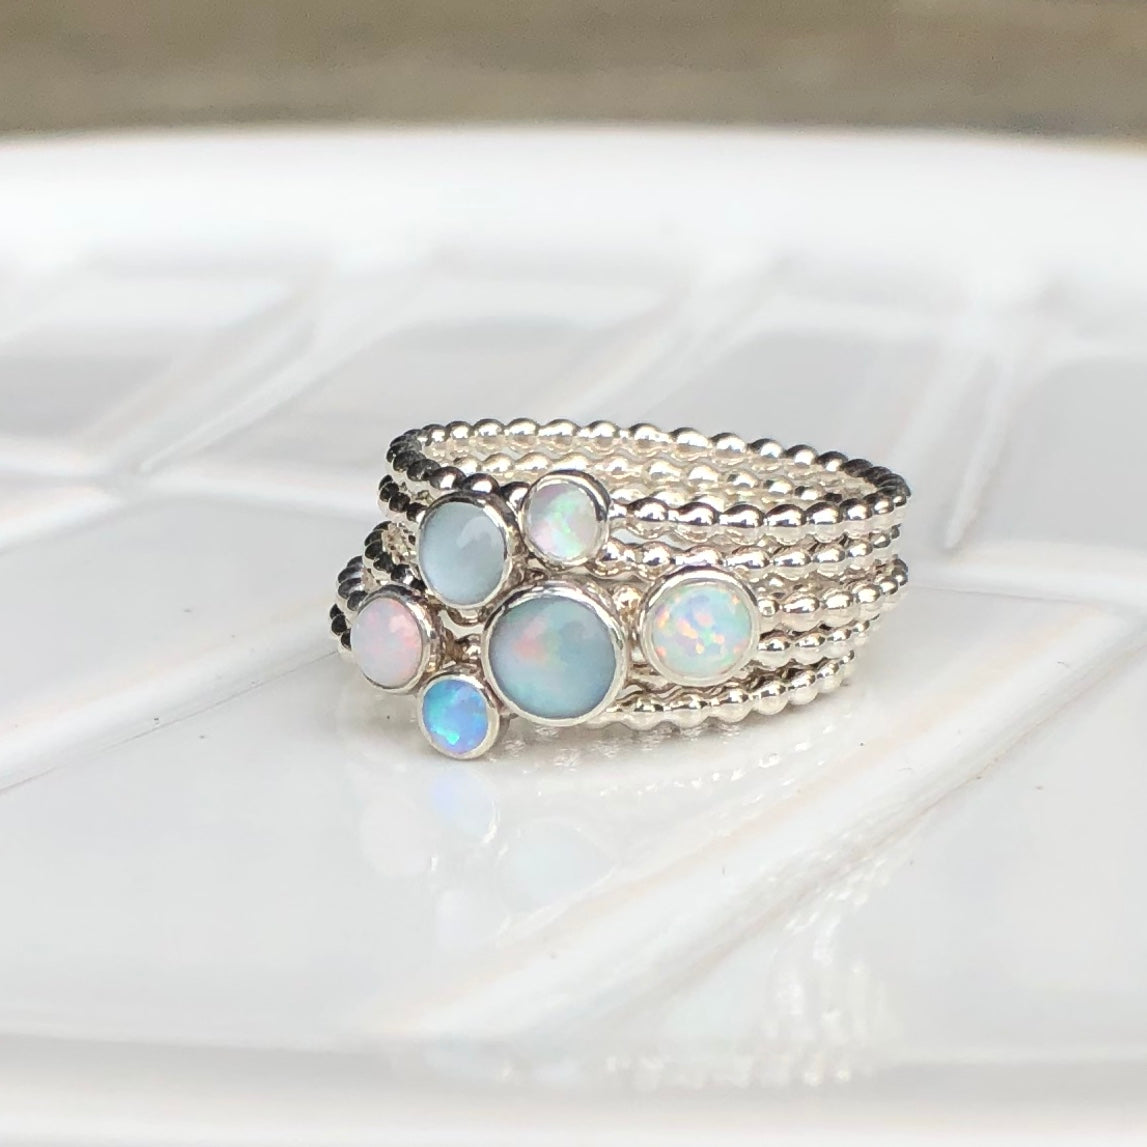 Different size Manmade Simulated Opals and genuine opals Stacking Rings - Trisha Flanagan